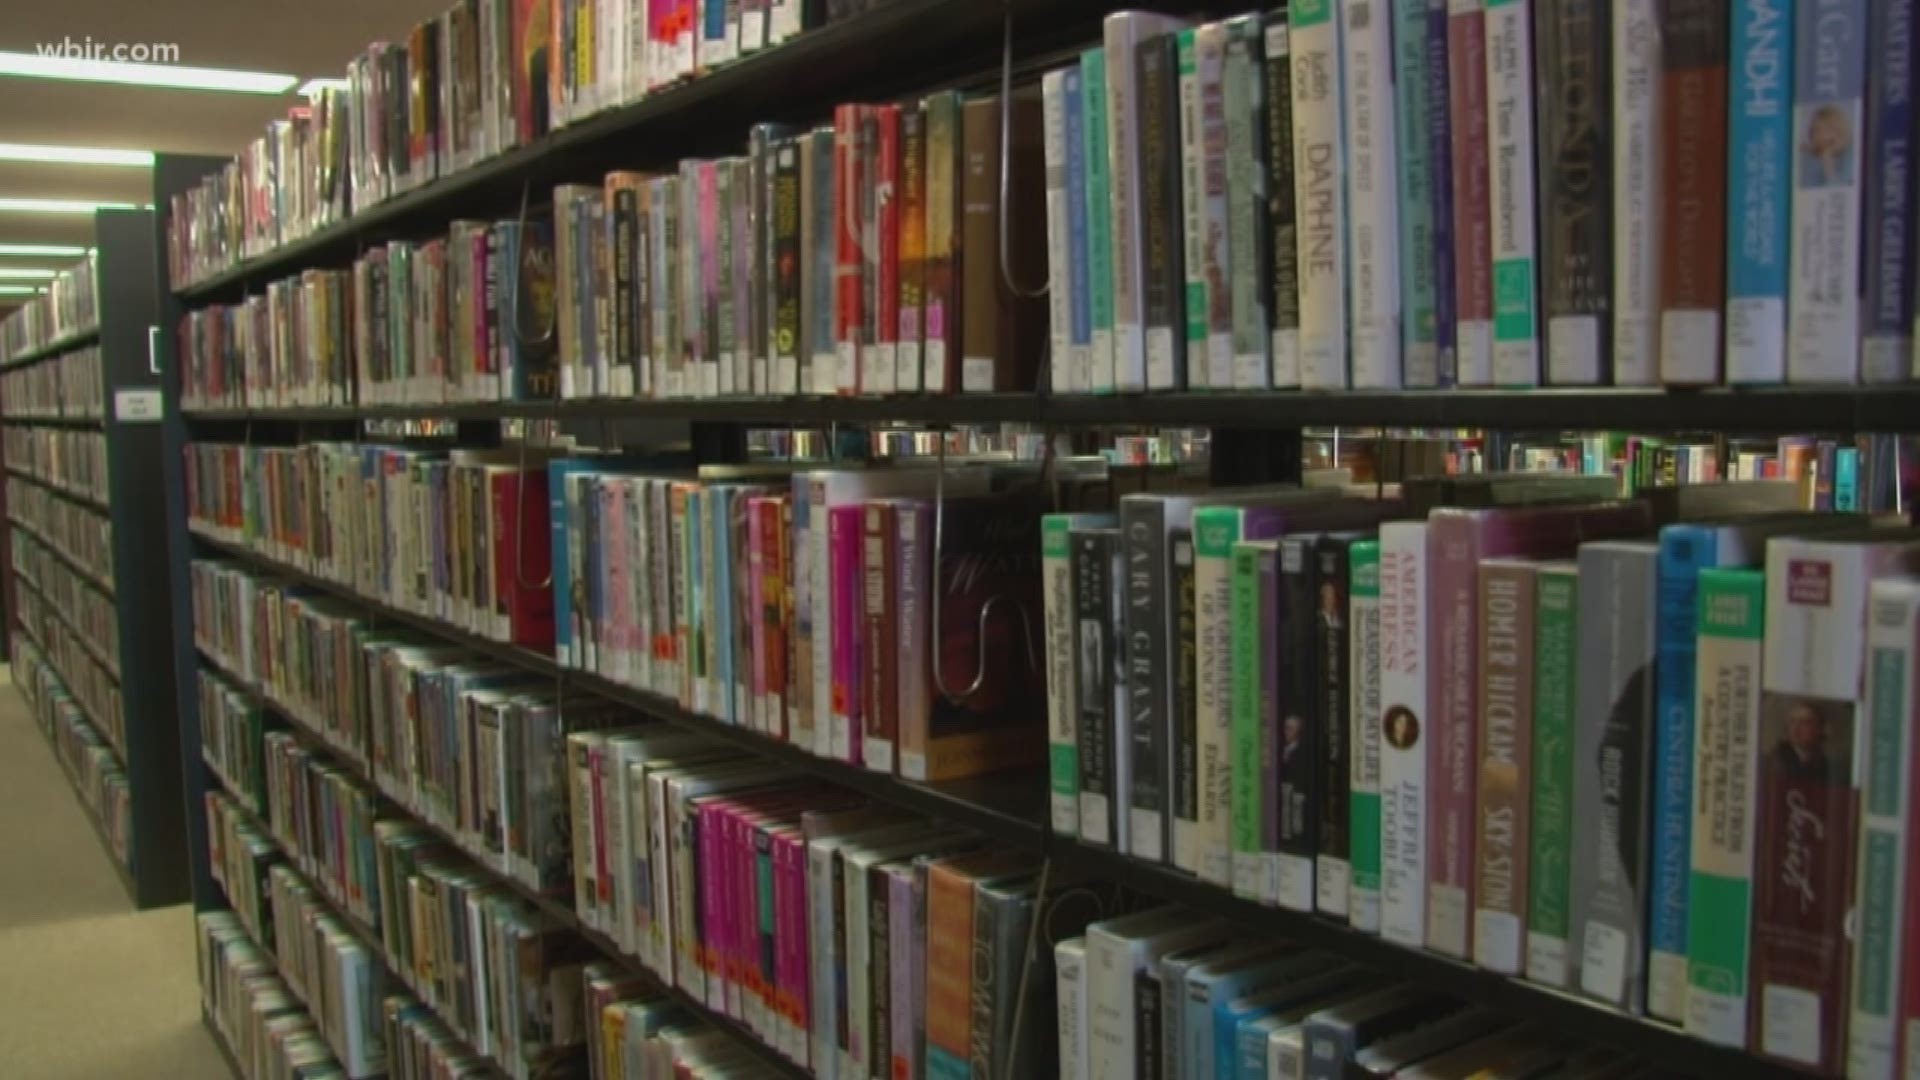 The Knox County Public Library is expanding its collection thanks to a $100,000 grant from the state.